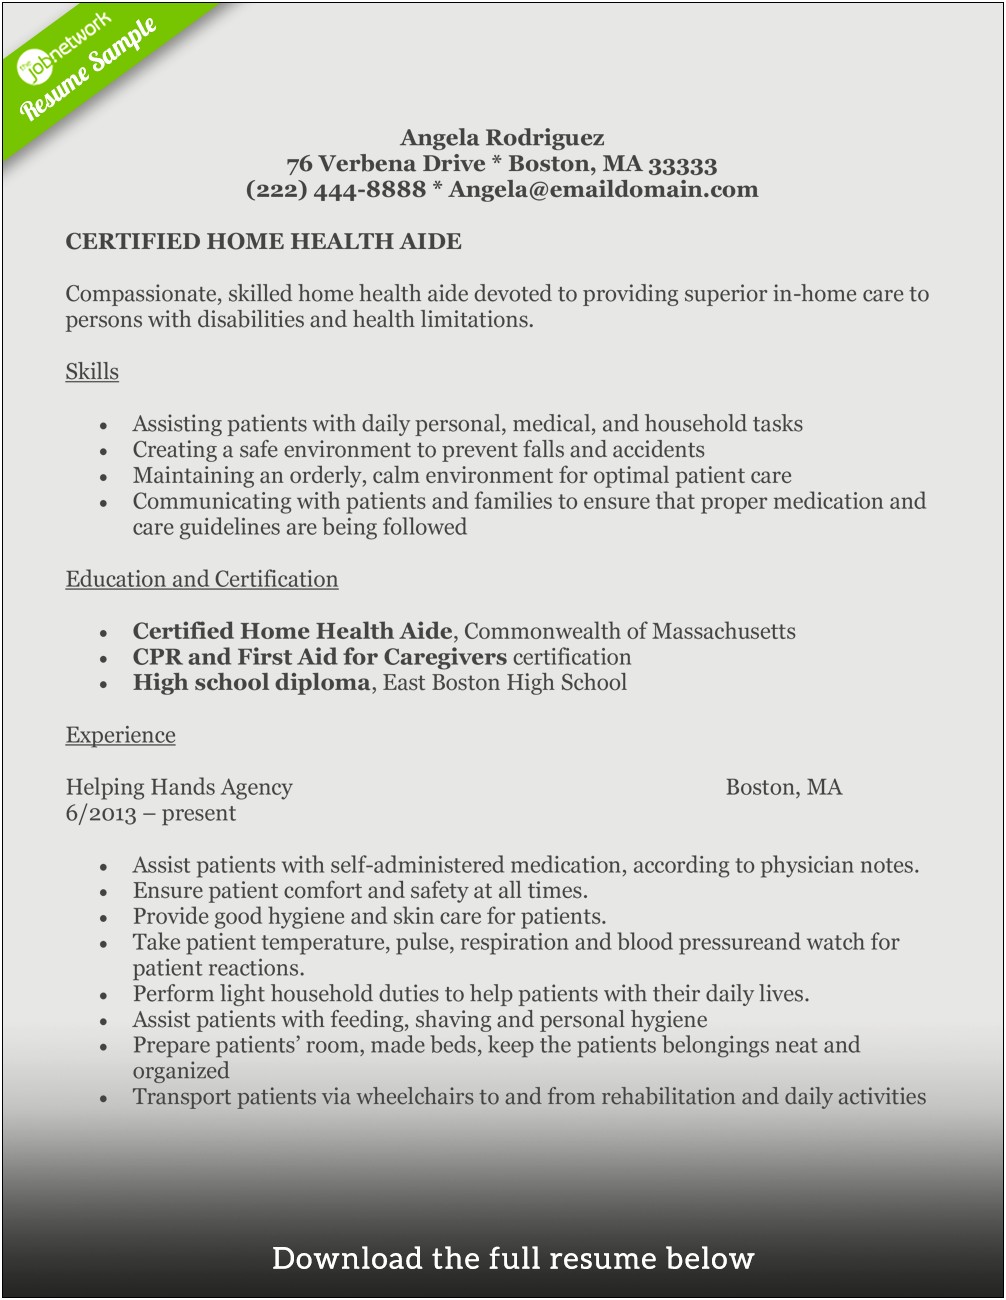 Home Health Aide Resume Or Cover Letter Samples